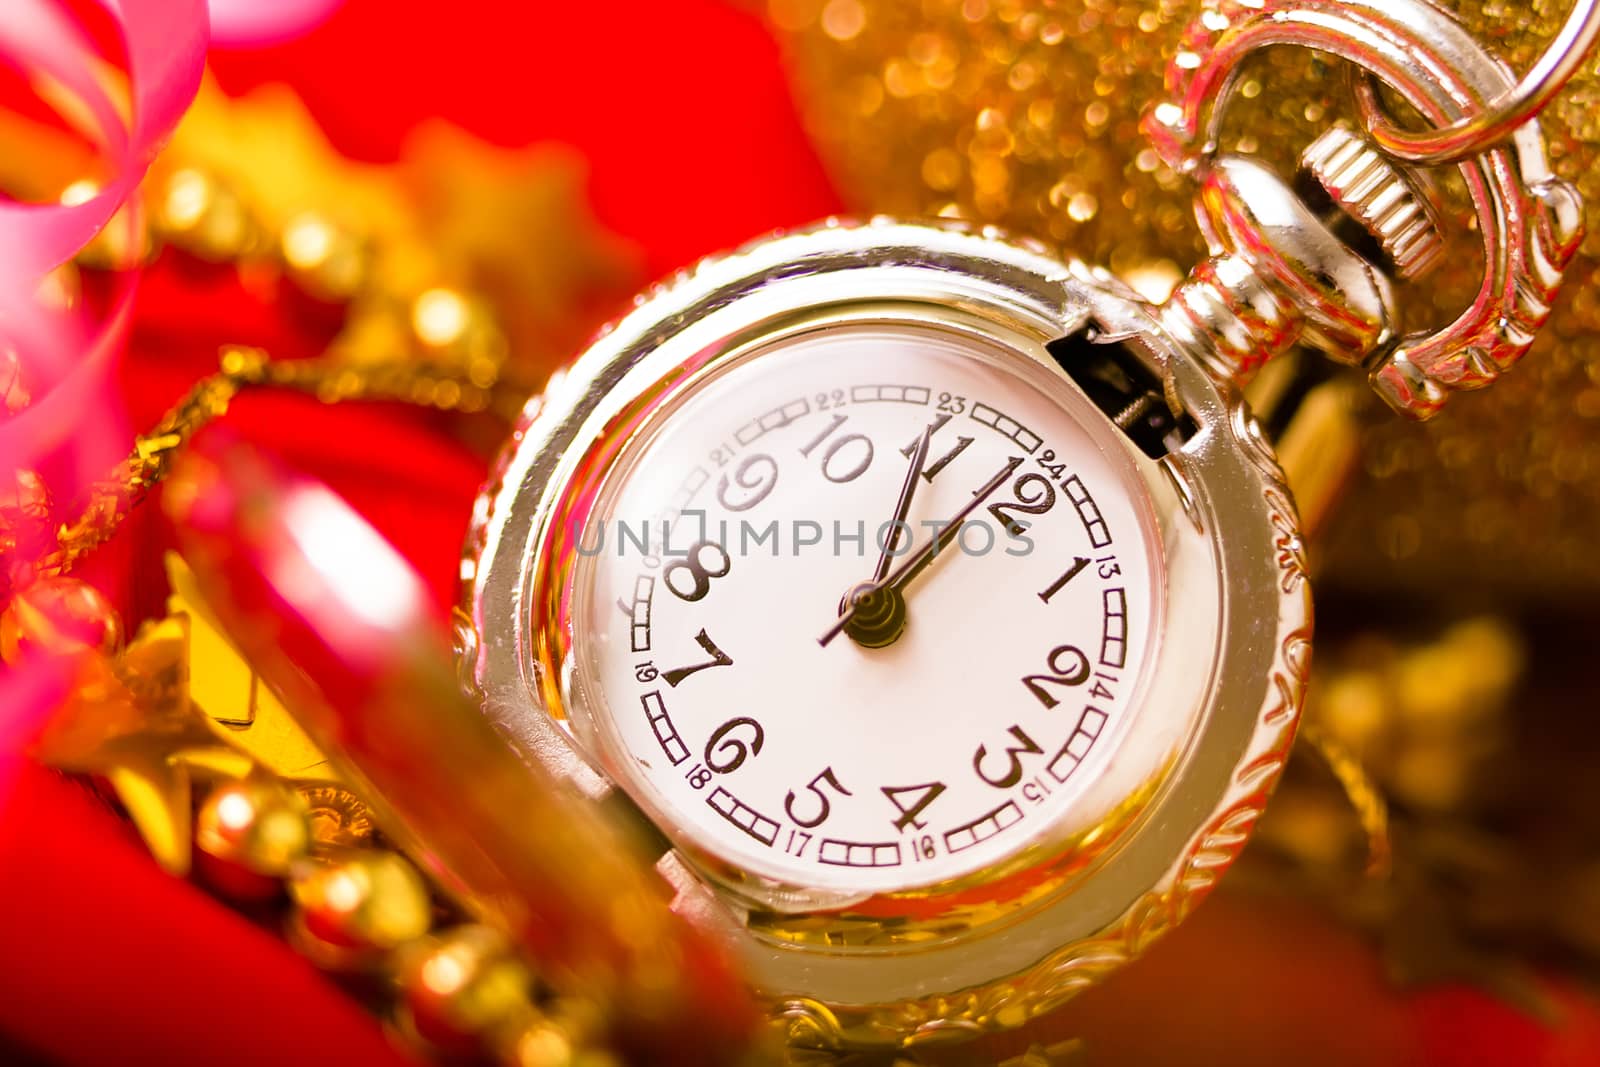 Christmas card. Silver vintage pocket watch on a red background with golden decorations